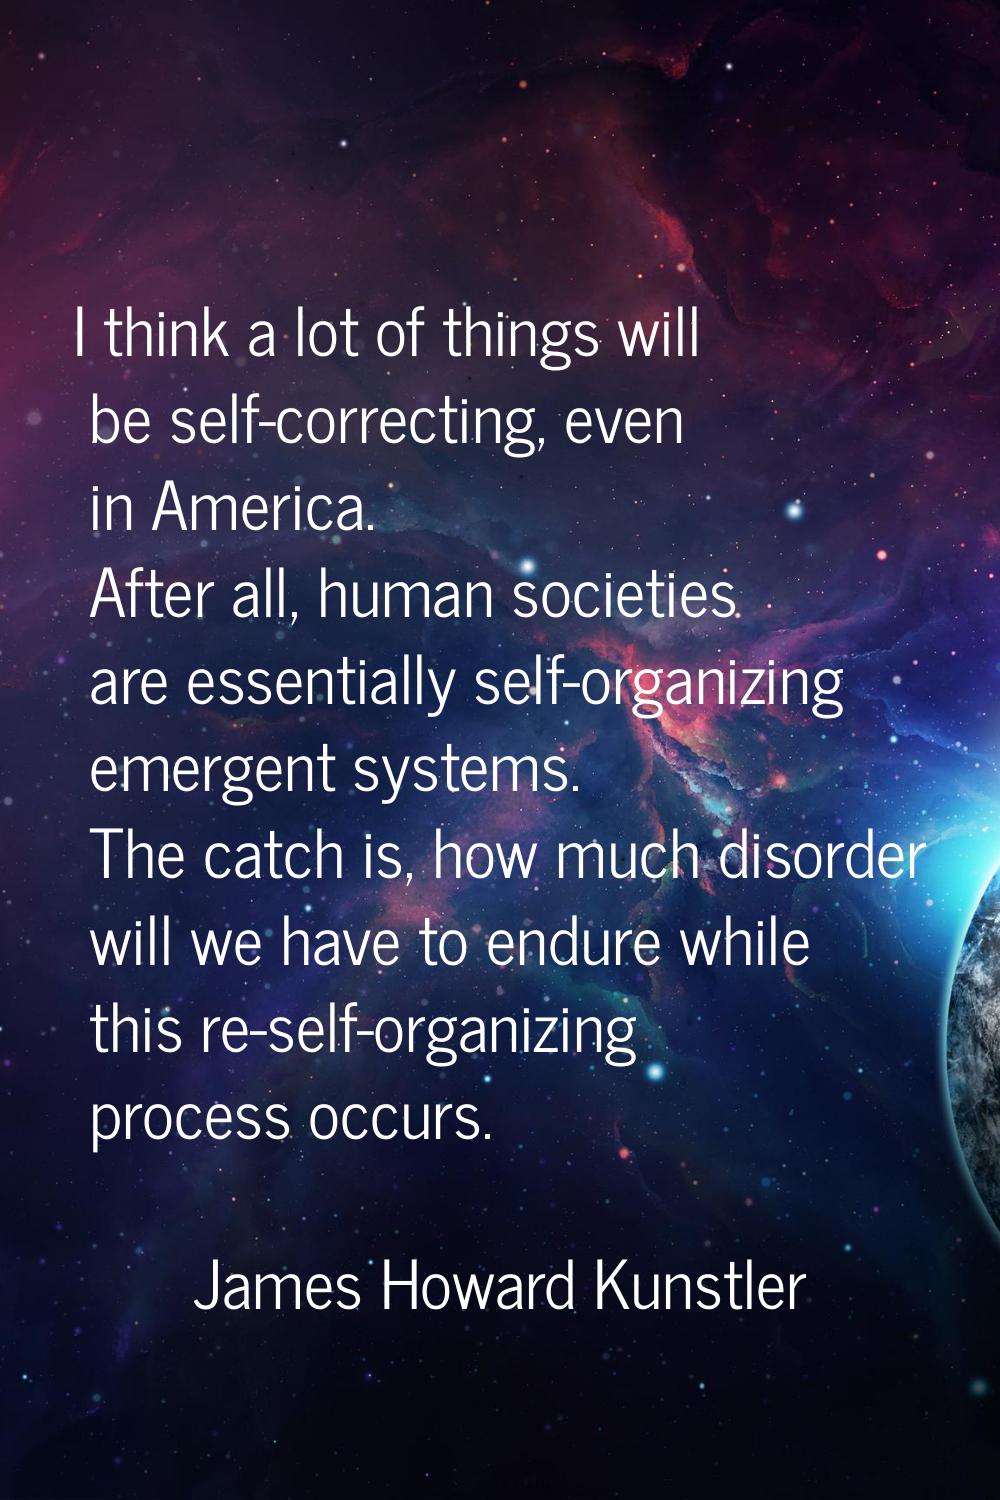 I think a lot of things will be self-correcting, even in America. After all, human societies are es